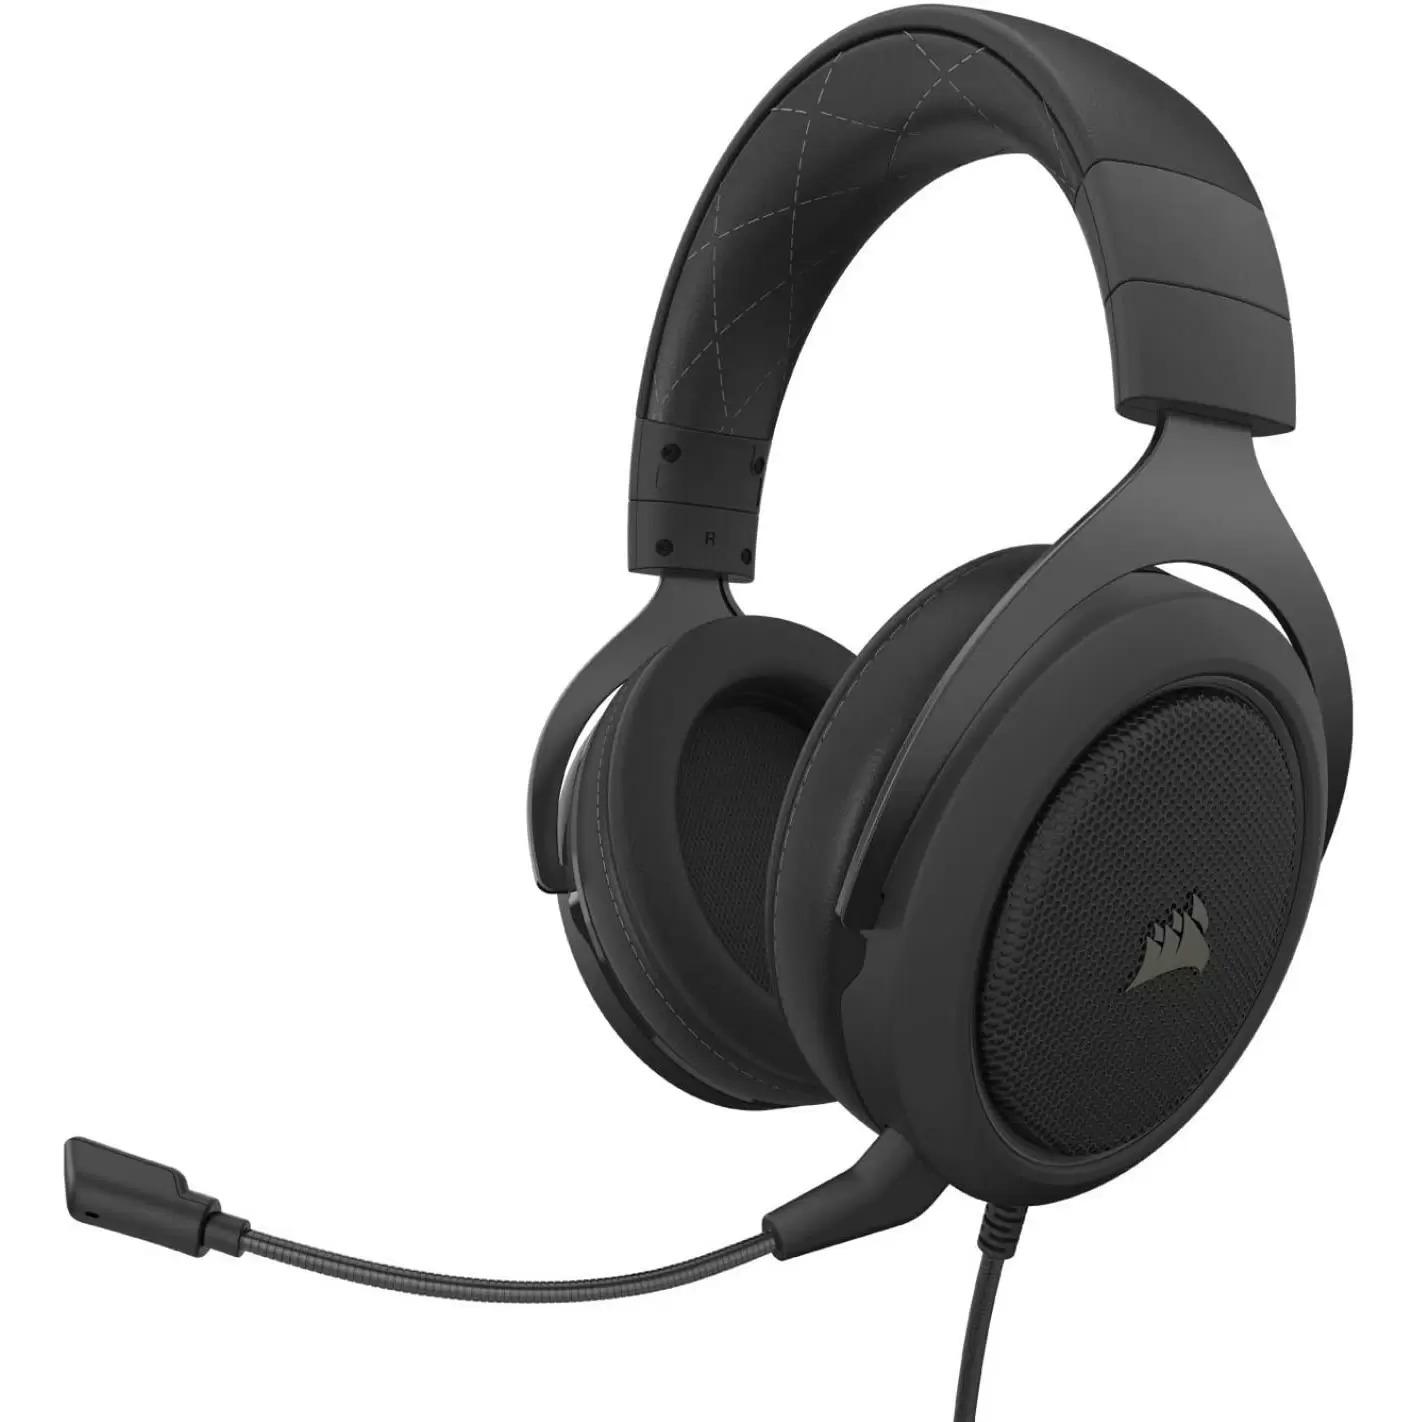 Corsair HS60 Pro 7.1 Virtual Surround Sound Gaming Headset for $39.99 Shipped